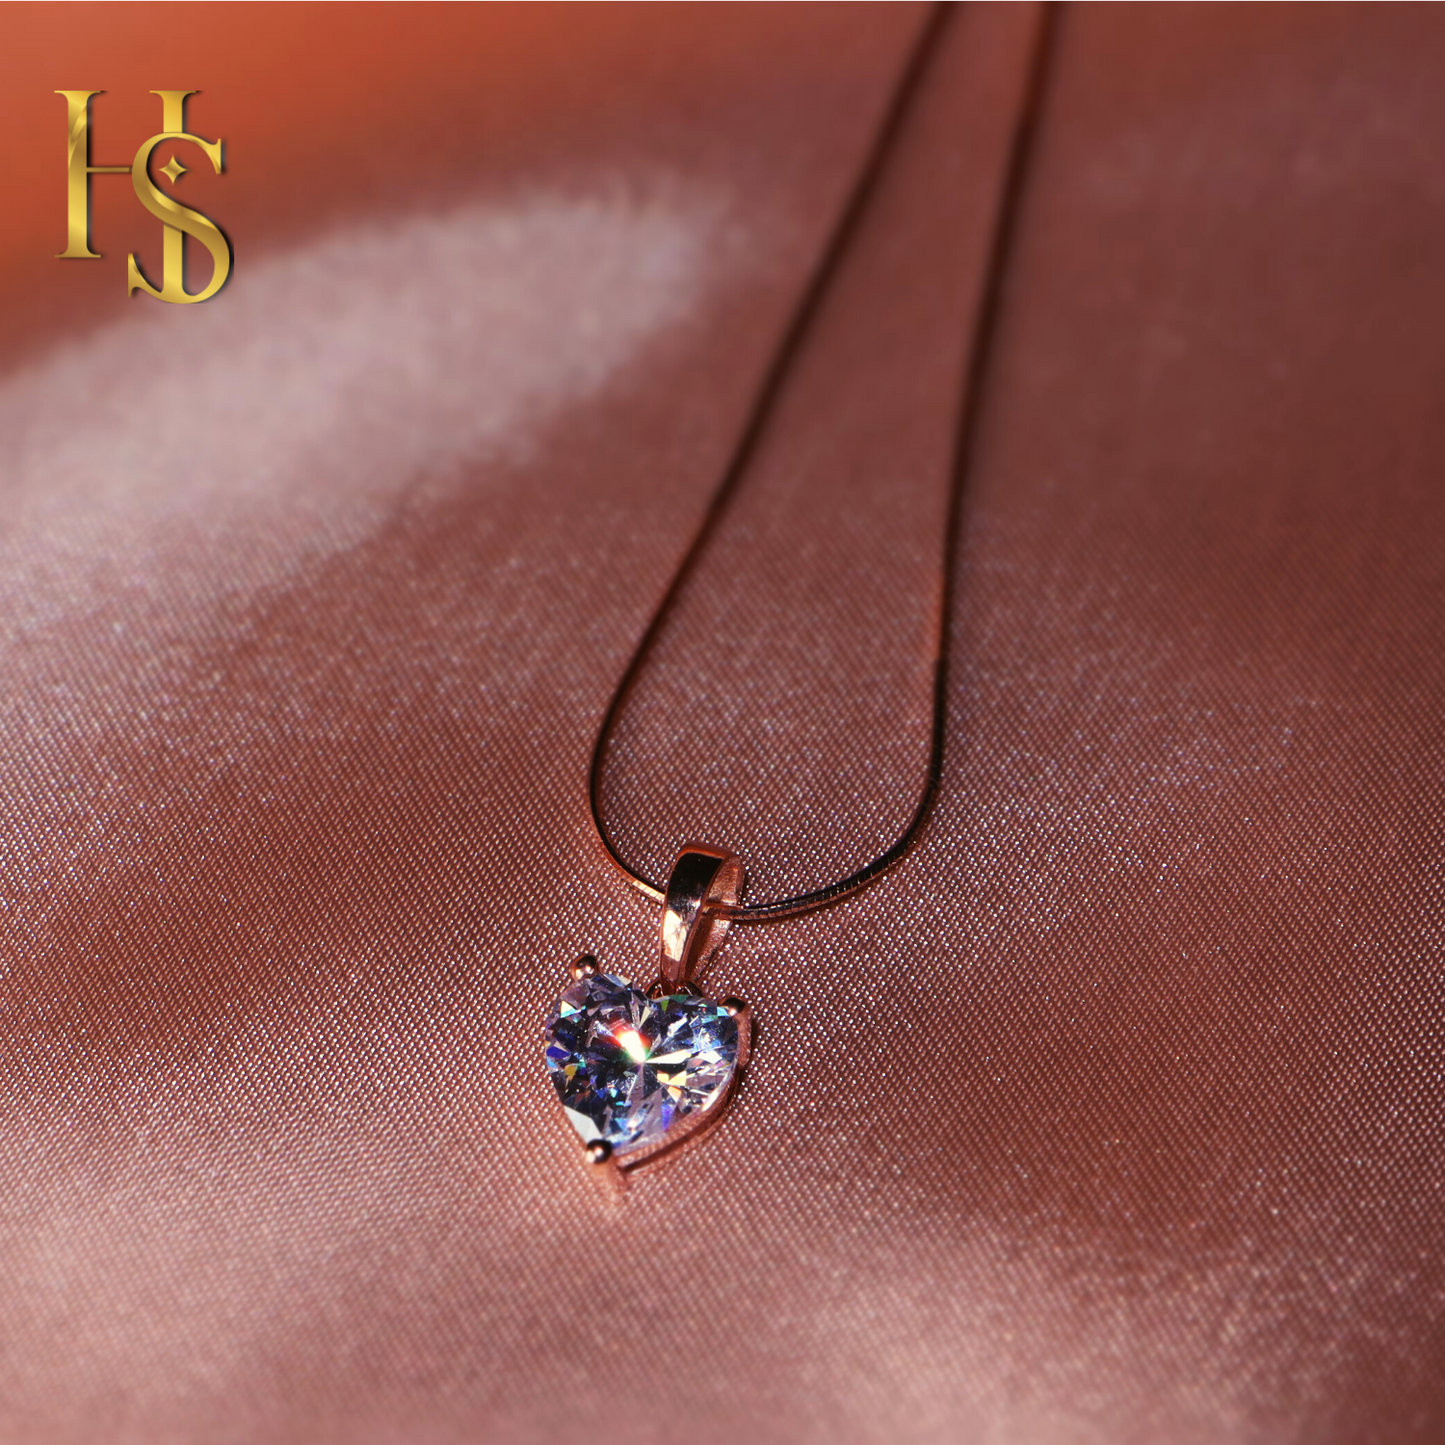 Solitaire Heart Earrings, Pendant & Chain Set in 92.5 Silver - 18k Rose Gold finish - embellished with Swarovski Zirconia